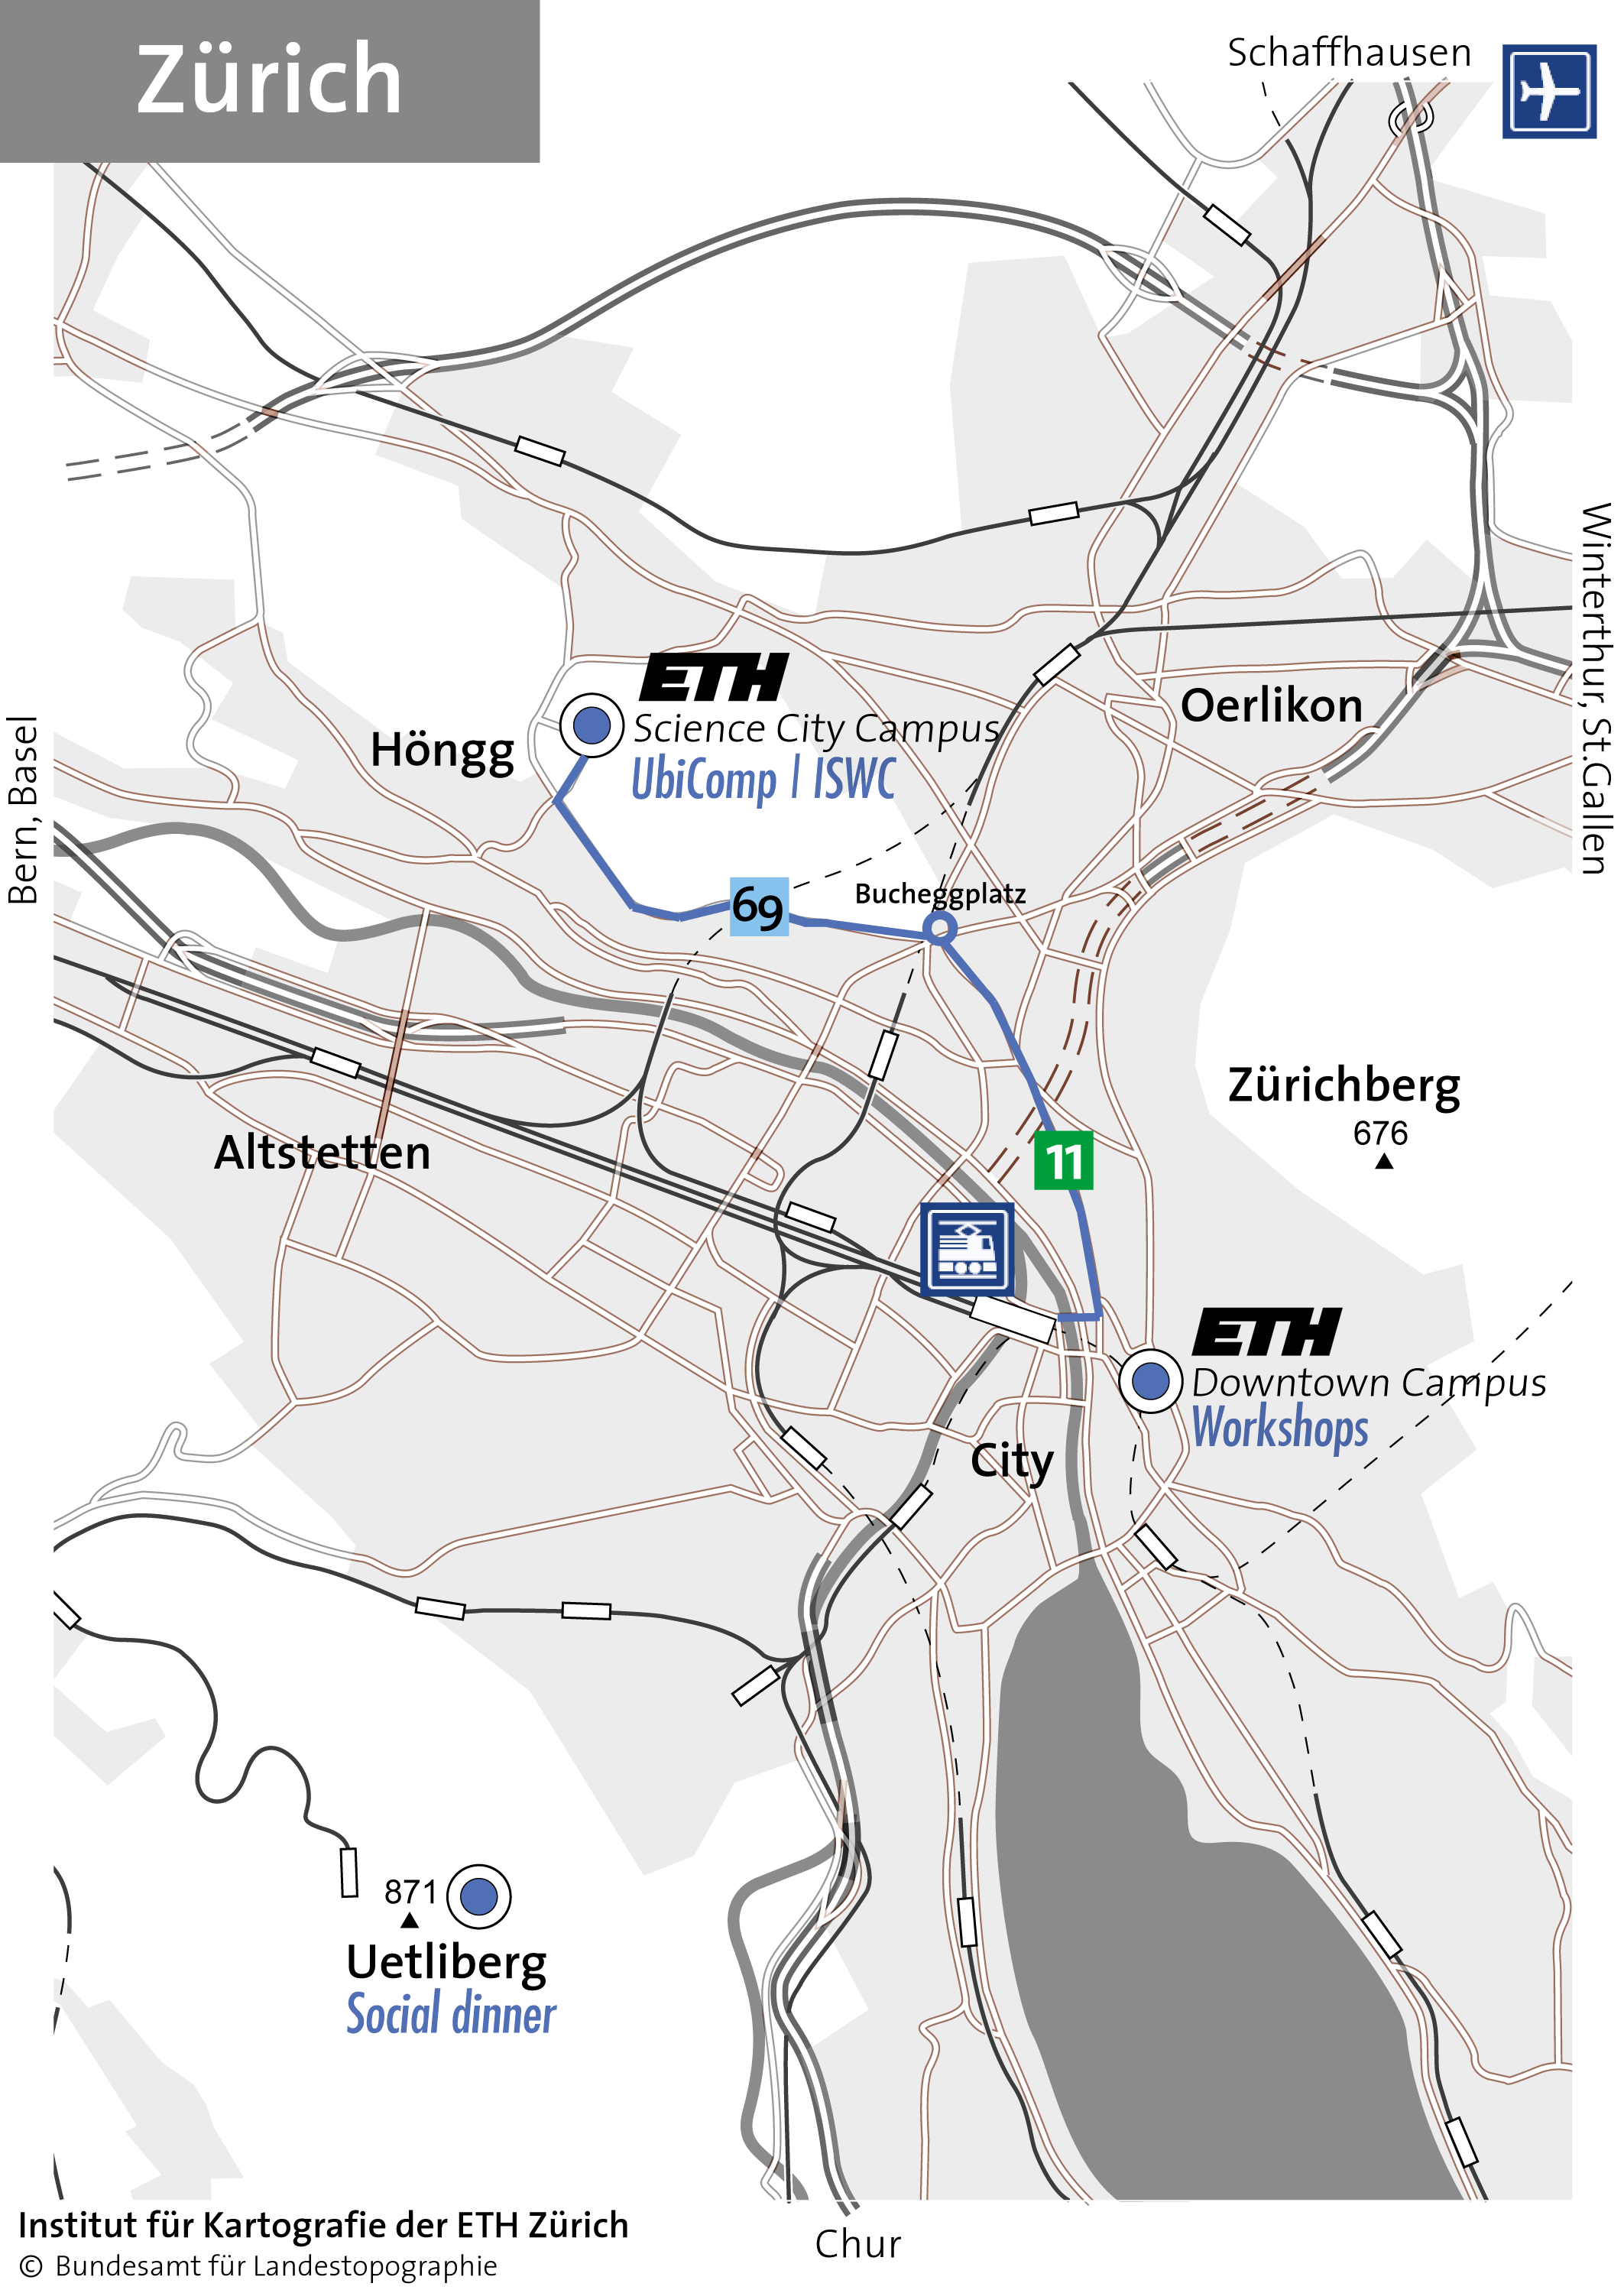 Map of Zurich with UbiComp conference venue on it